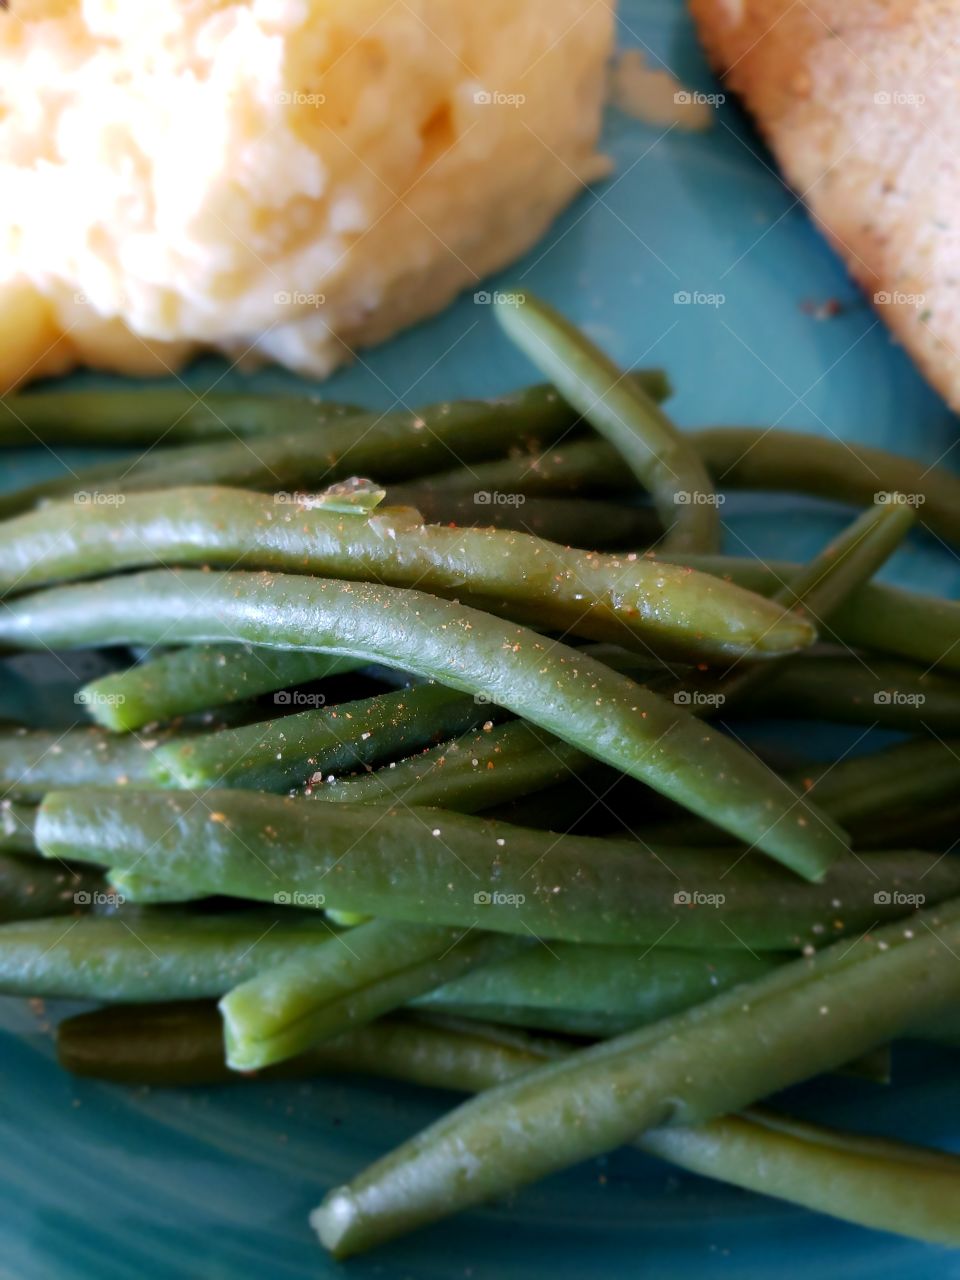 A delectable serving of freshly steamed green beans with delicious seasoning.